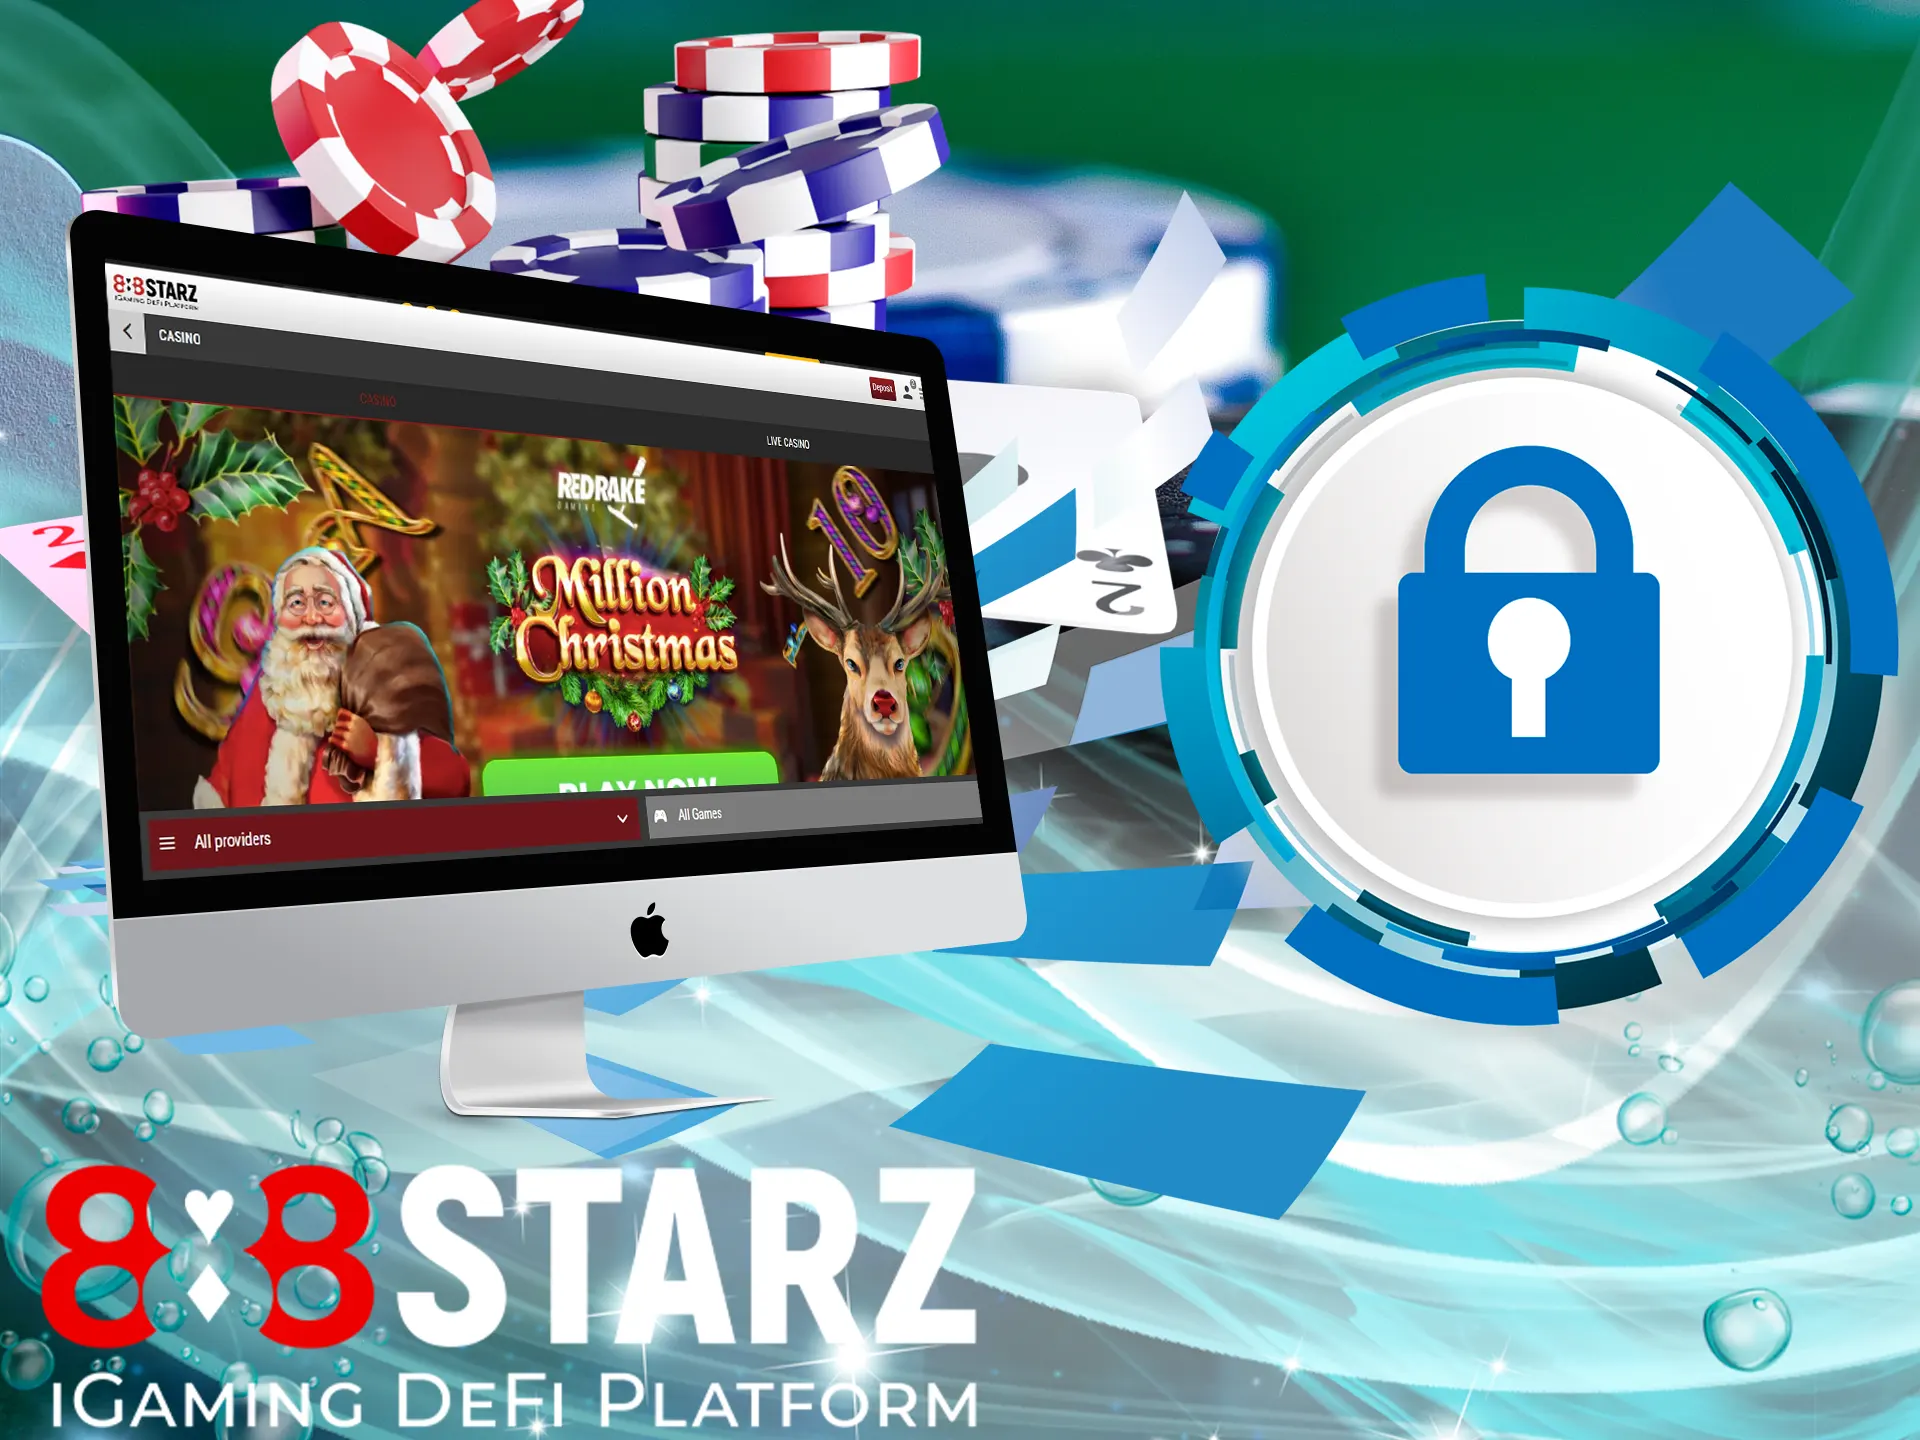 888starz strictly must ensure the safety of your personal data, provide modern methods of protection of information.